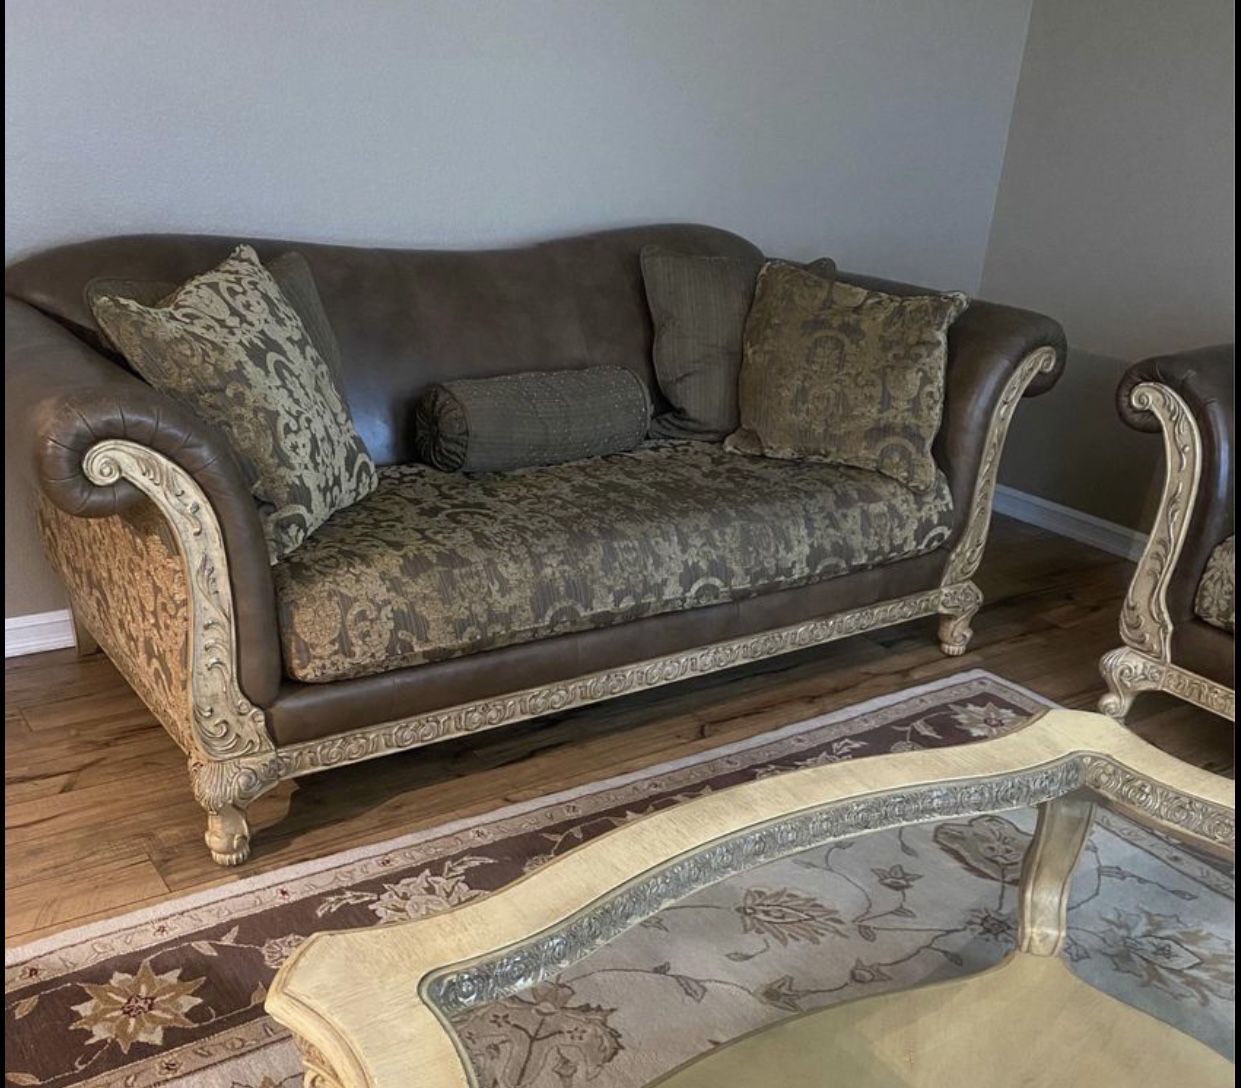 3 Piece Set. Sofa, Loveseat and Coffee Table 